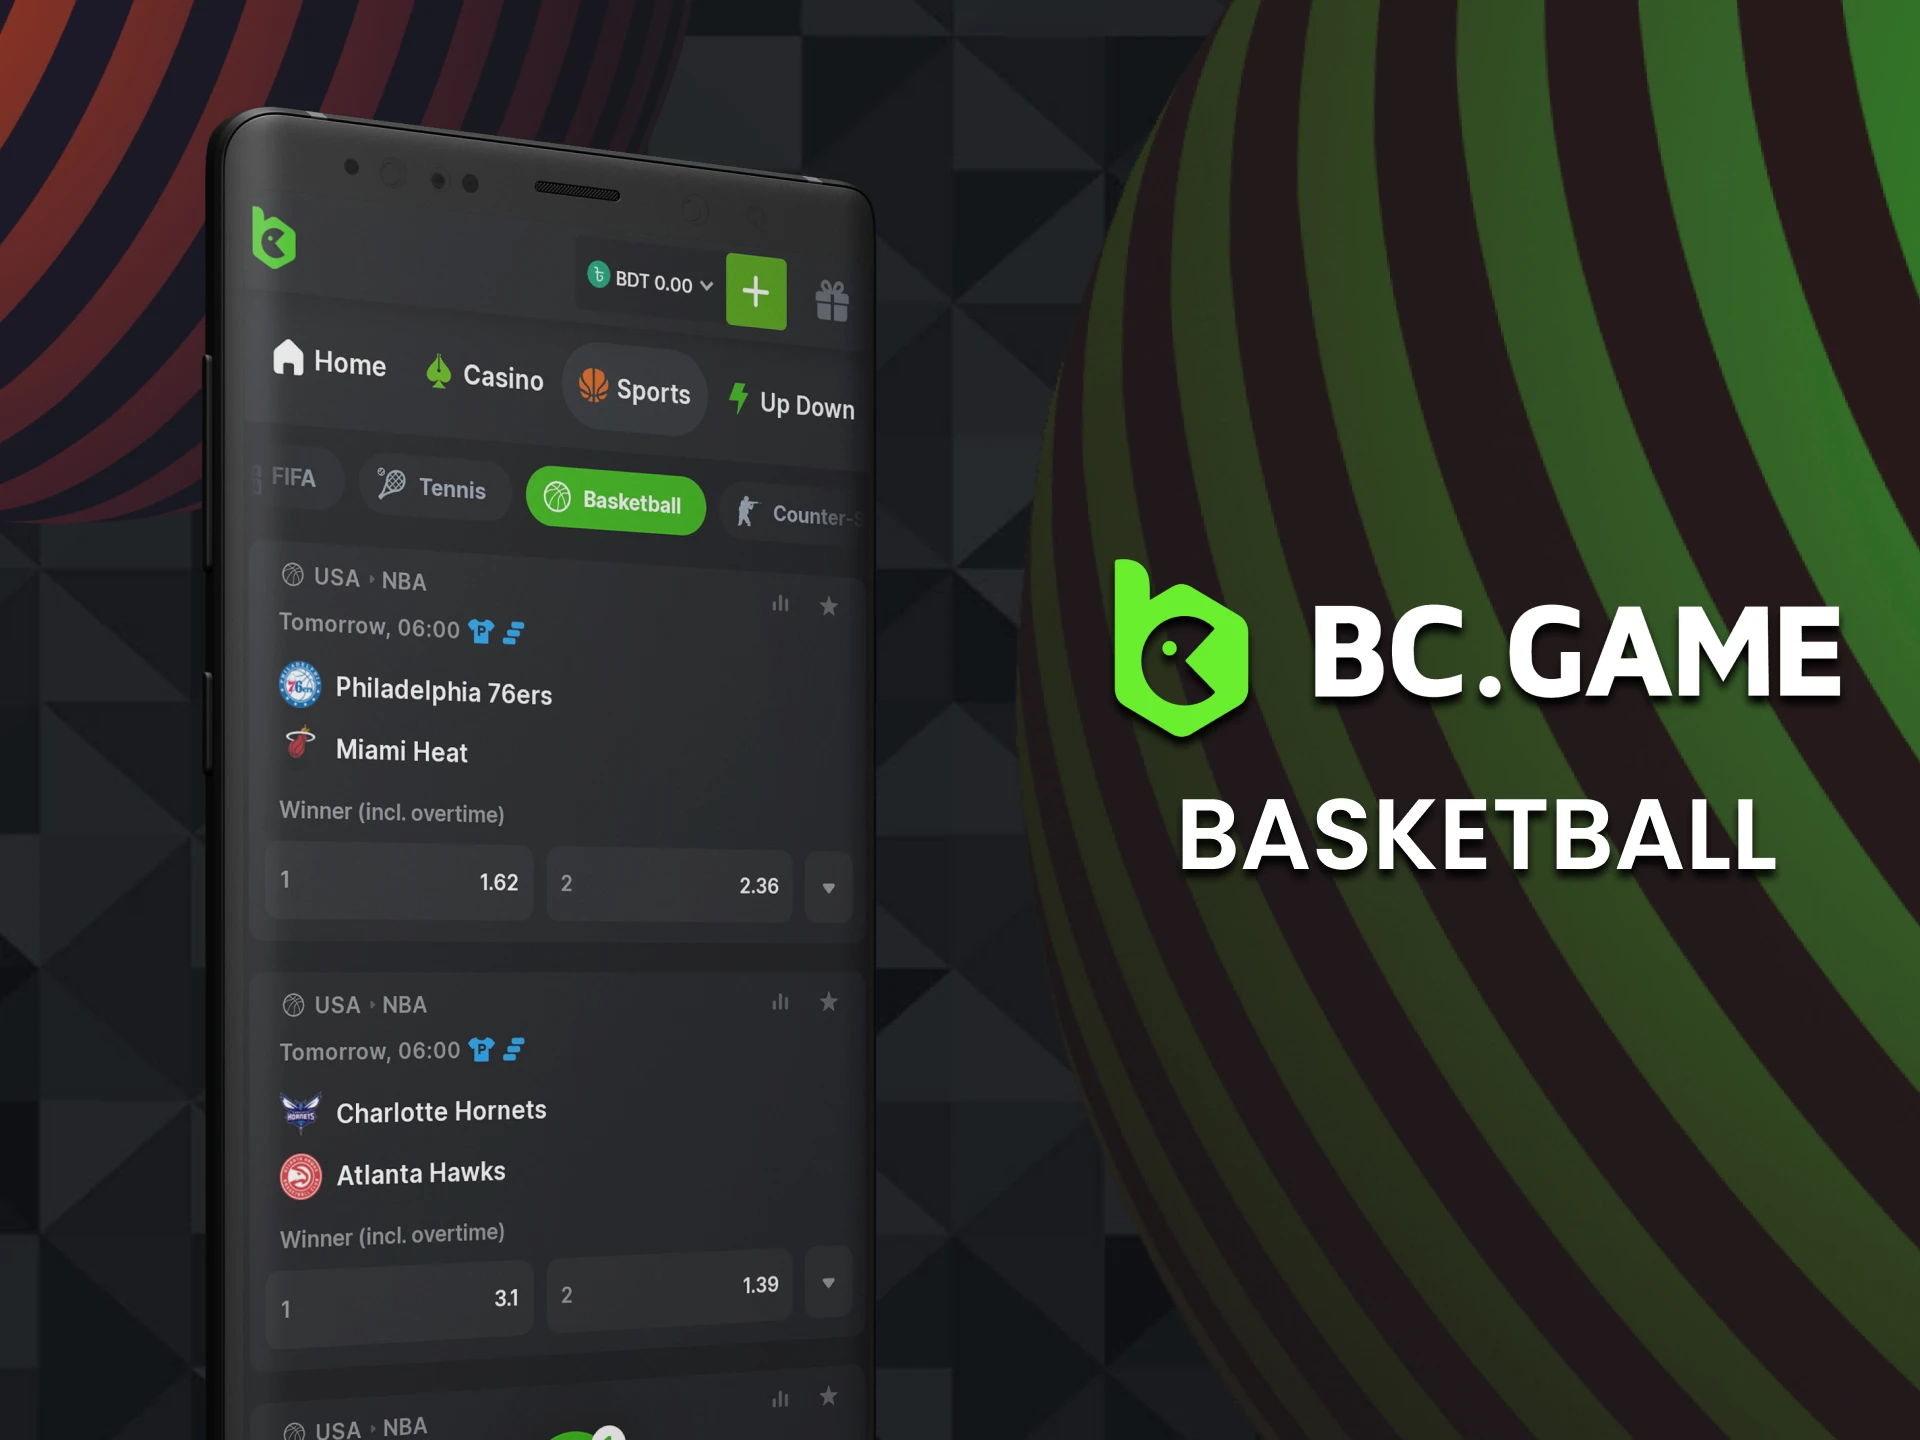 There are lots of basketball leagues to bet on in the BC Game app.